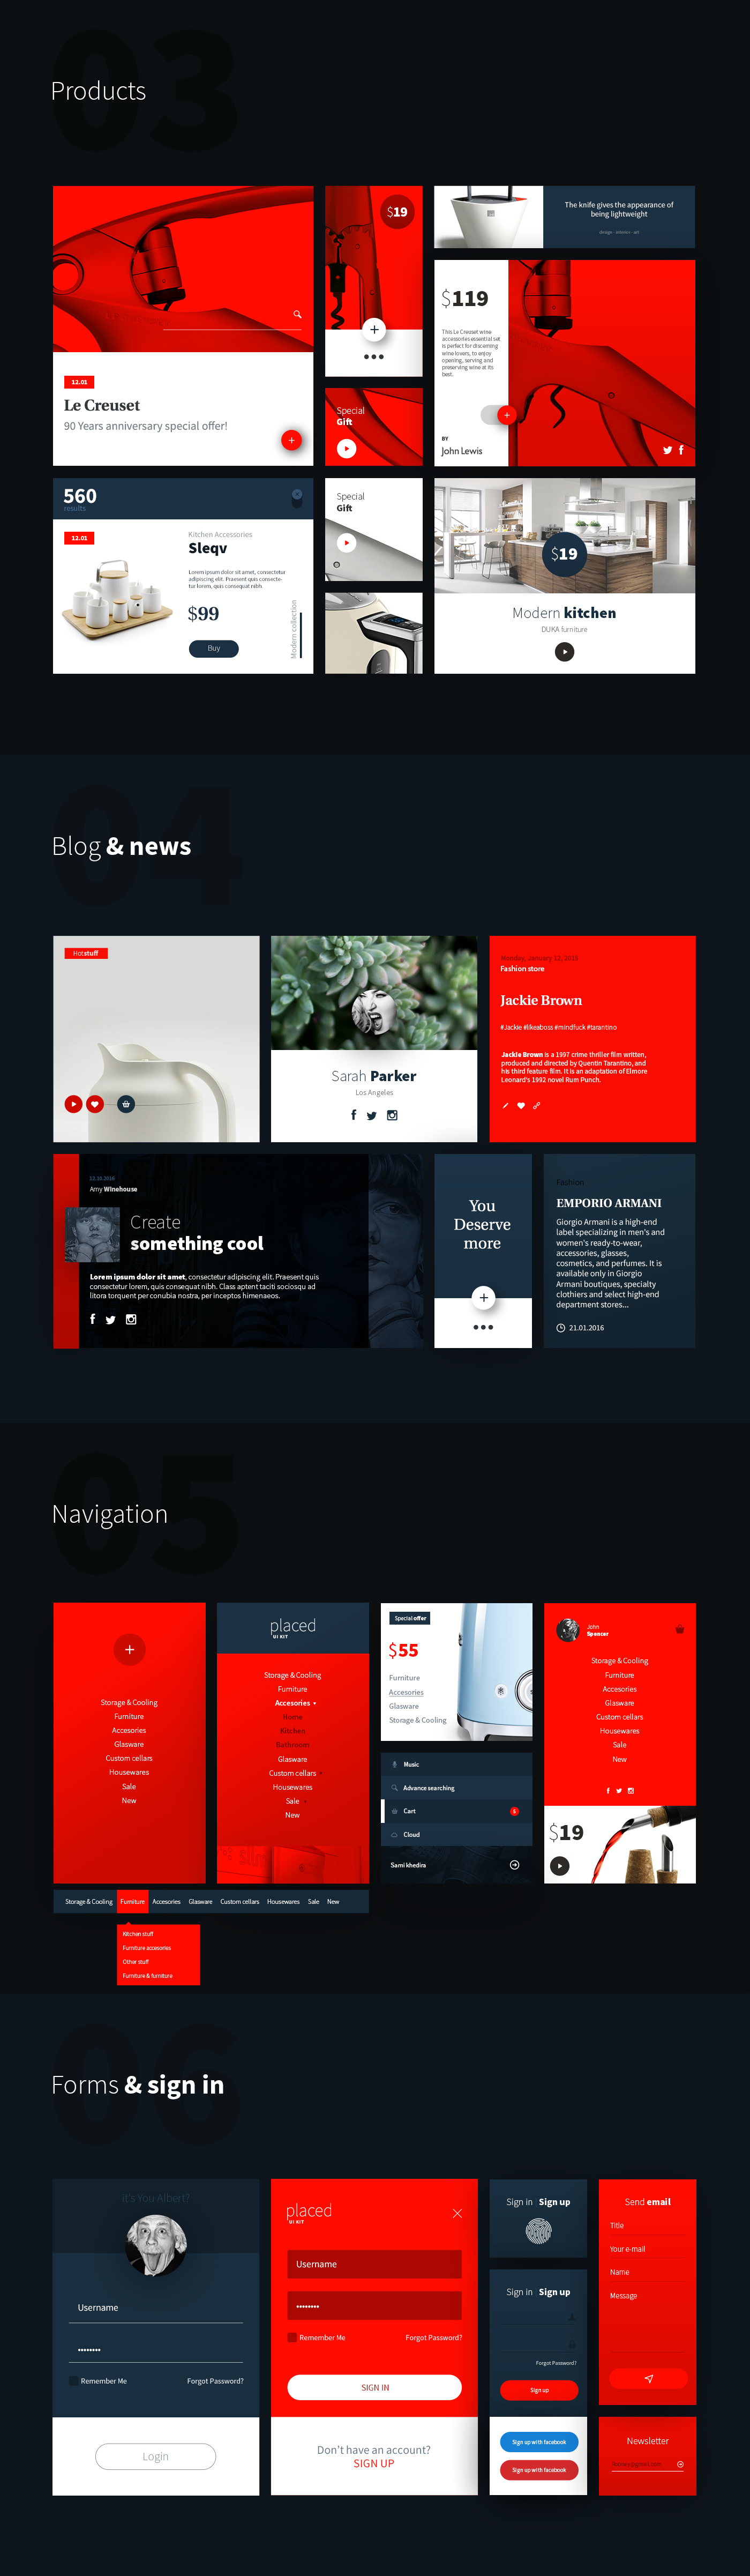 Placed placed ui kit UI ui kit ux psd psd file download red & white red clean minimalistic modern